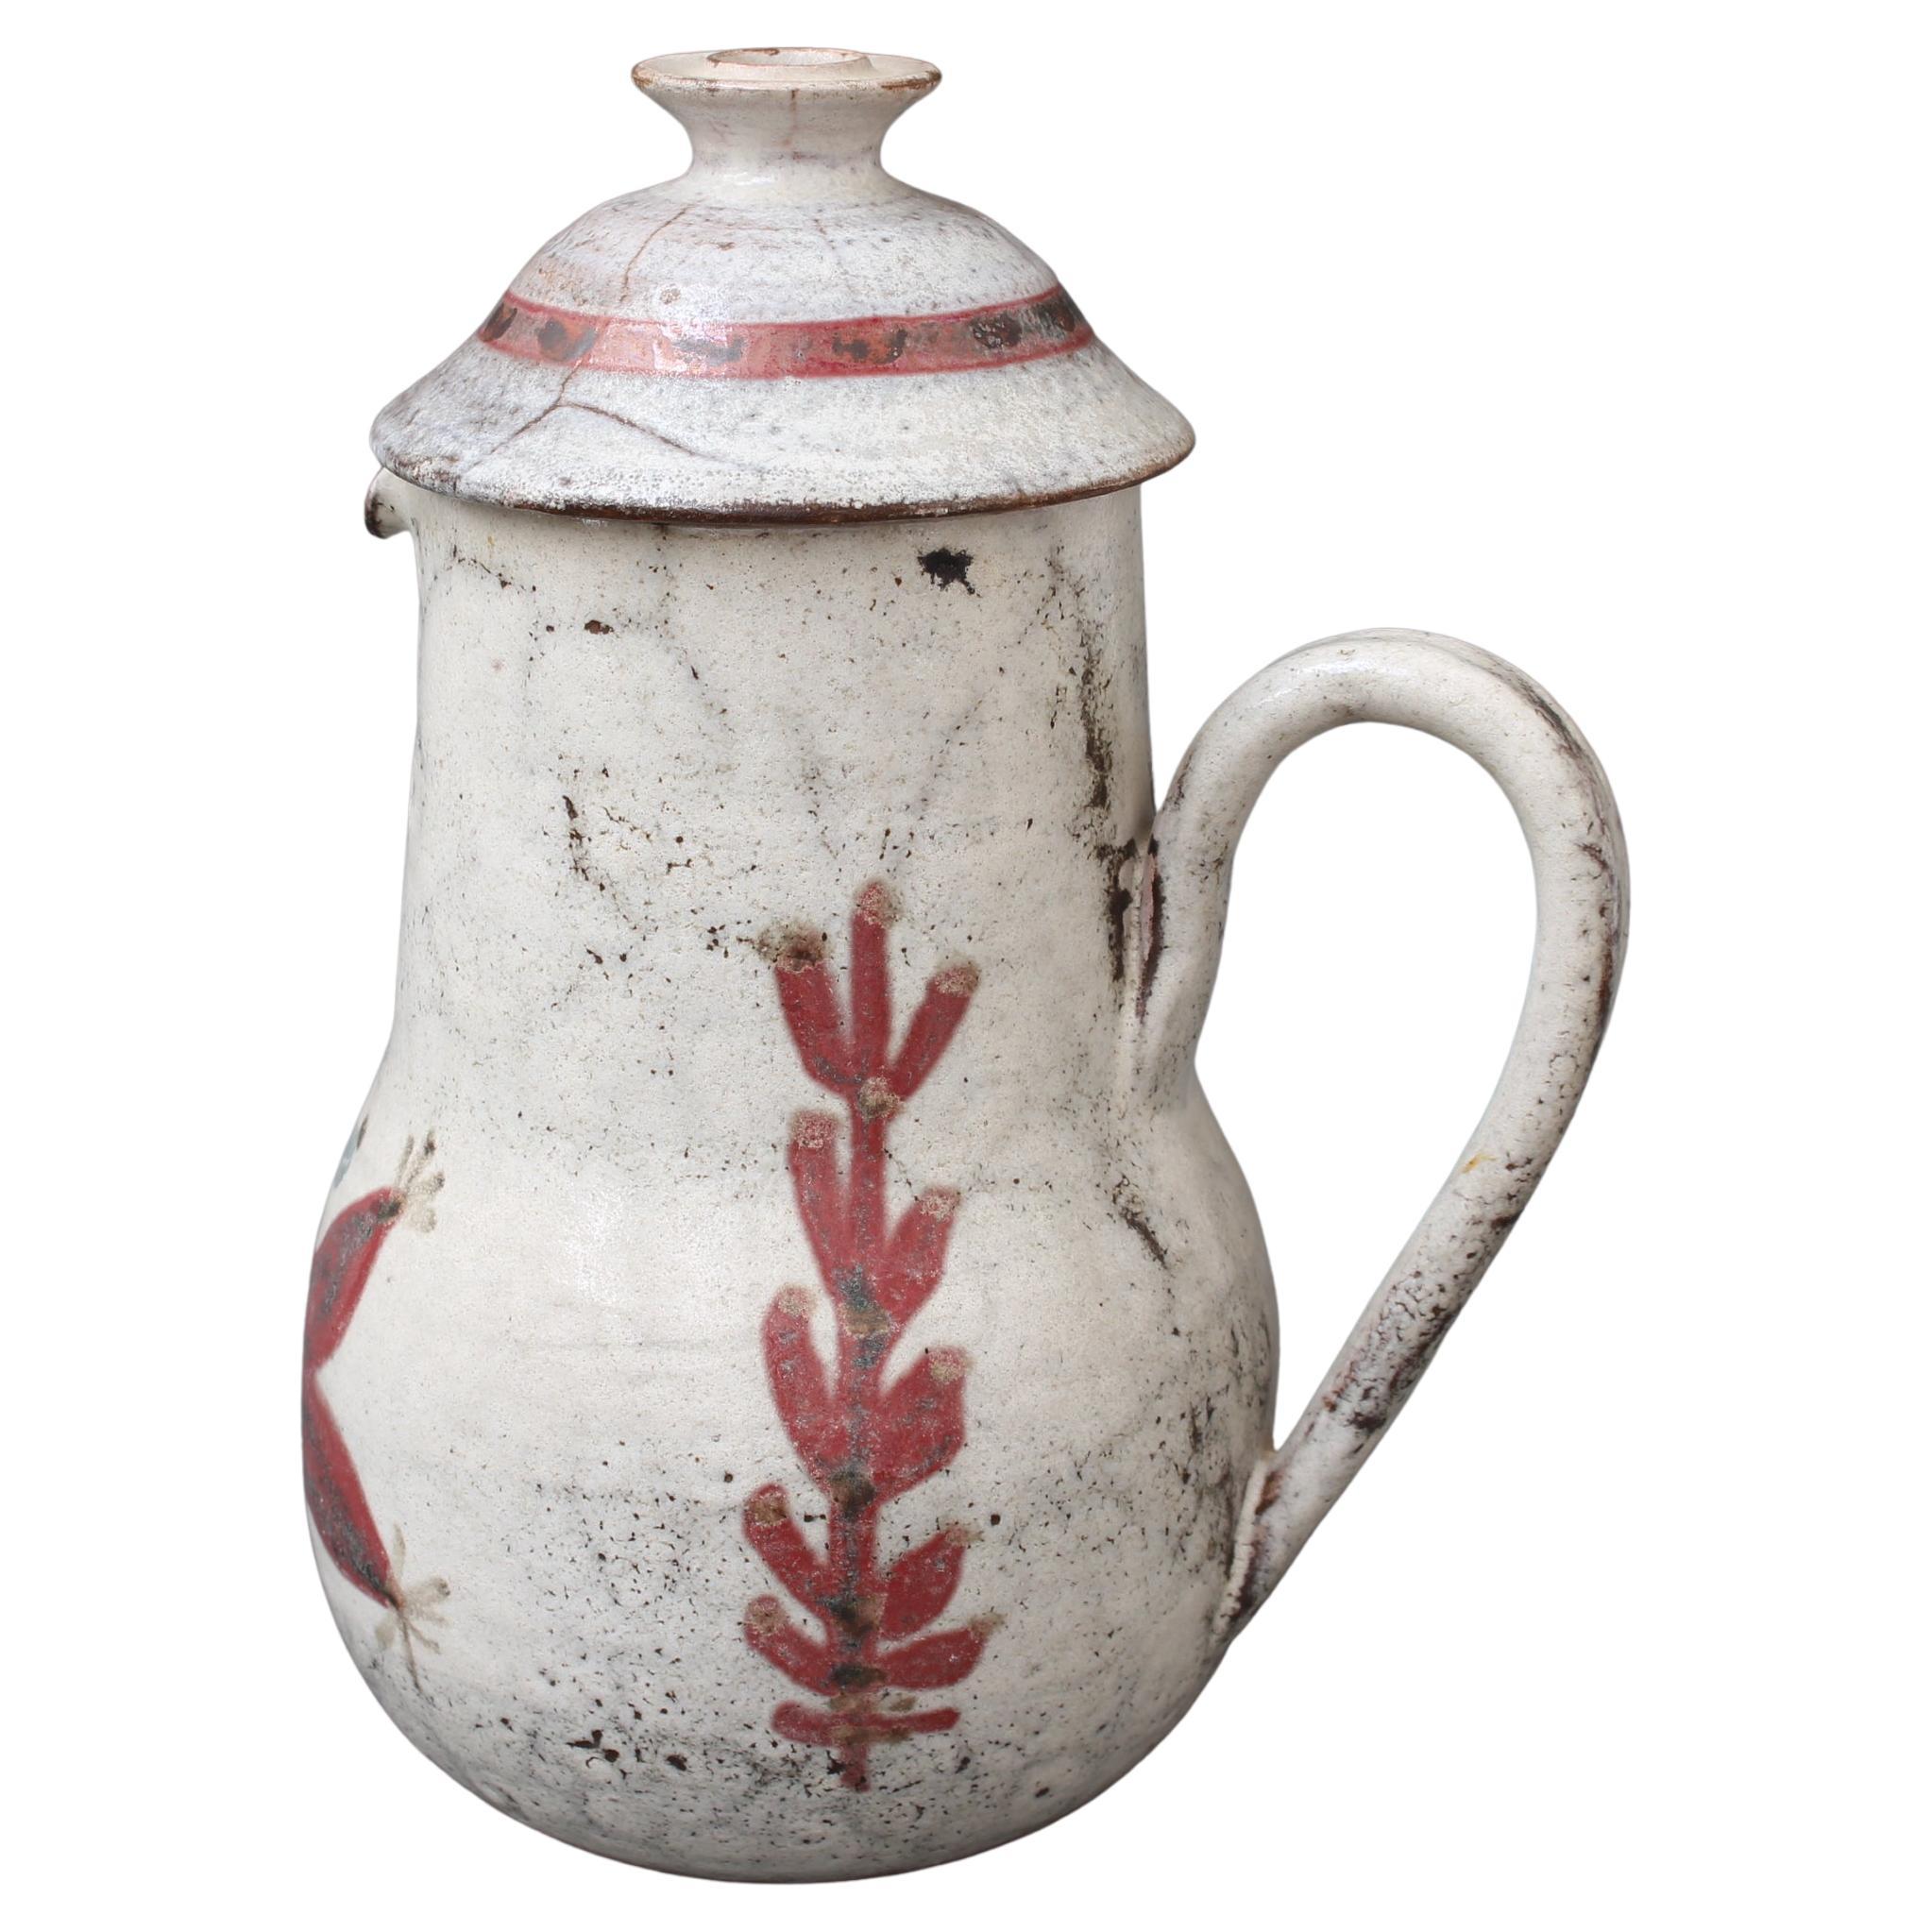 Midcentury French Ceramic Lidded Pitcher by Le Mûrier, 'circa 1960s' For Sale